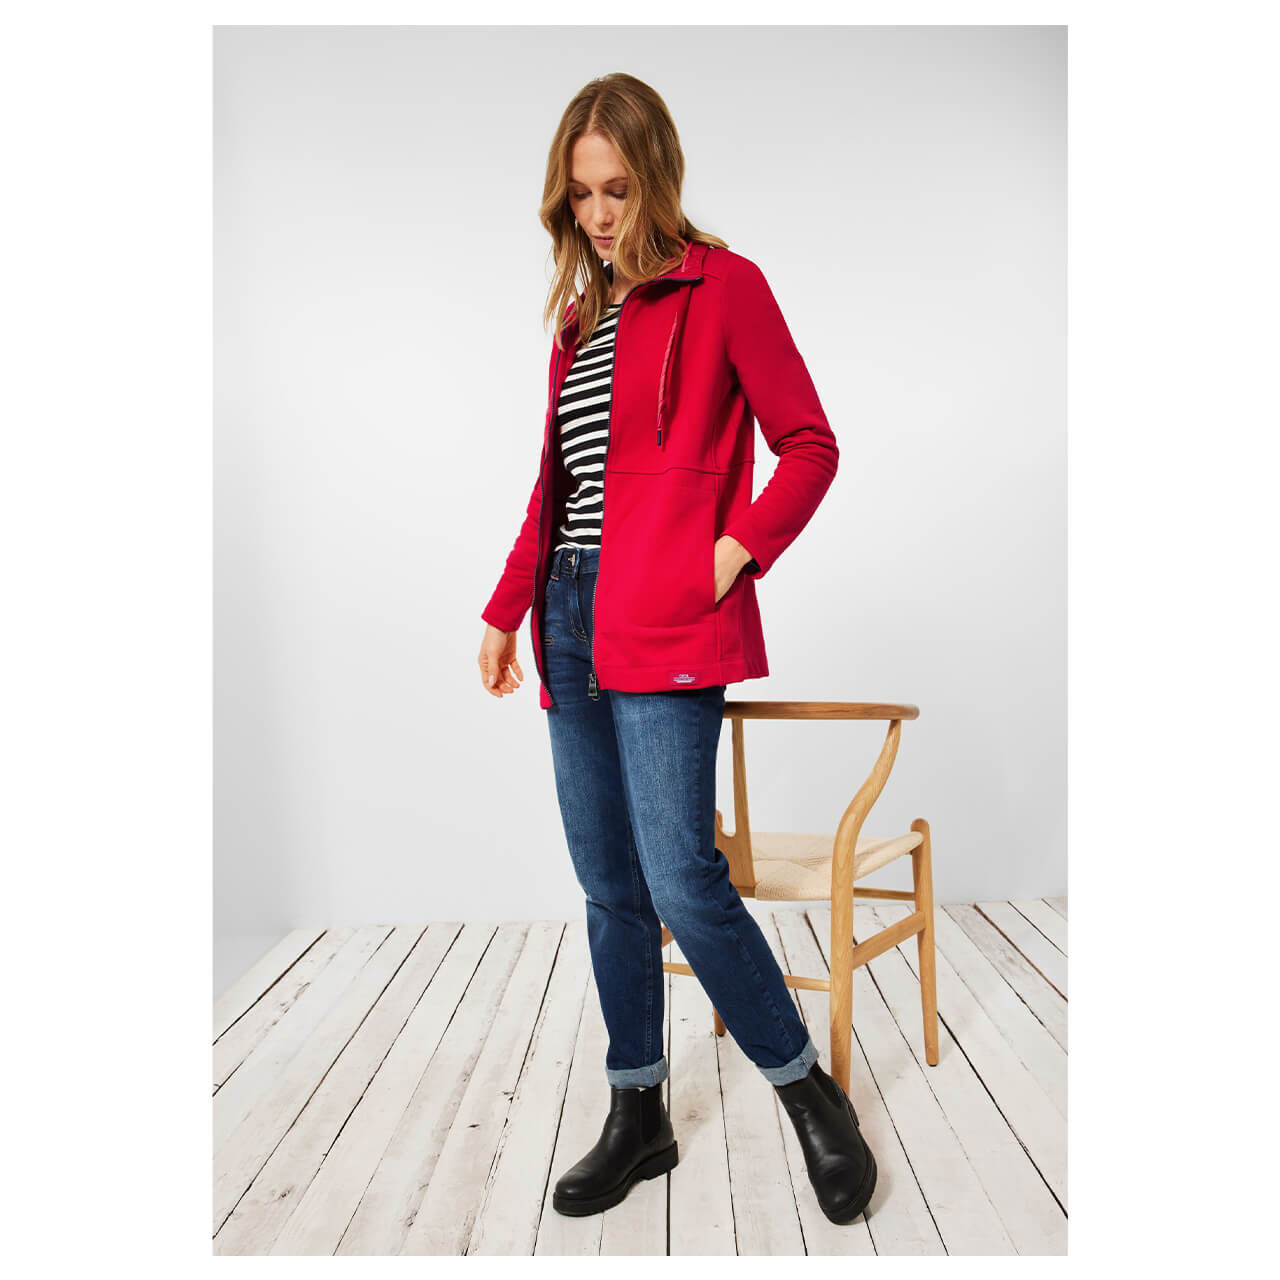 Cecil Sweatjacke strong red